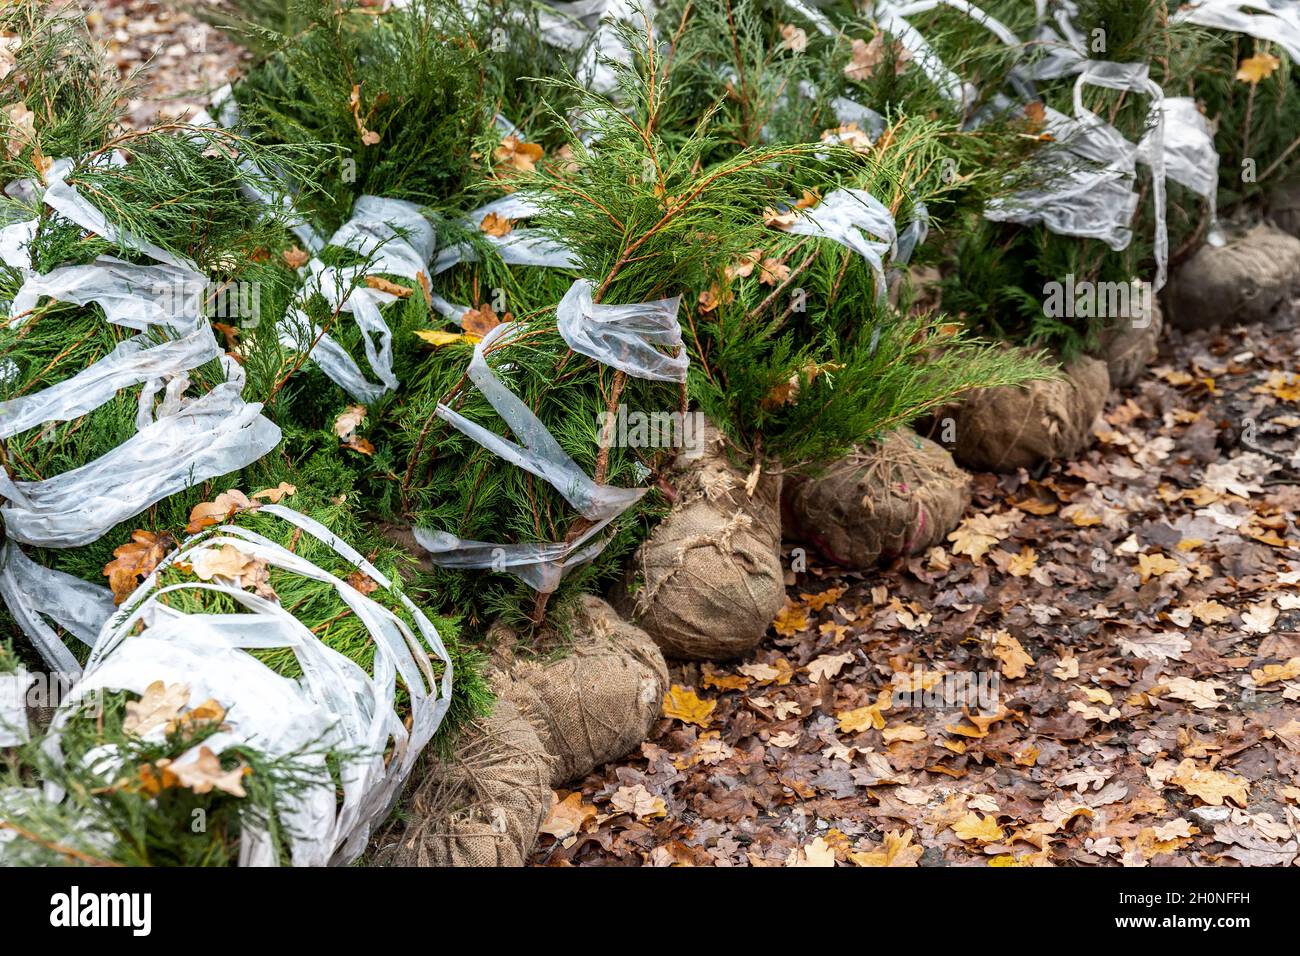 Row of many thuja or cedar wrapped tree aaplings delivering from plant nursery and seedlings for gardening city park or house garden. Lanscaping Stock Photo